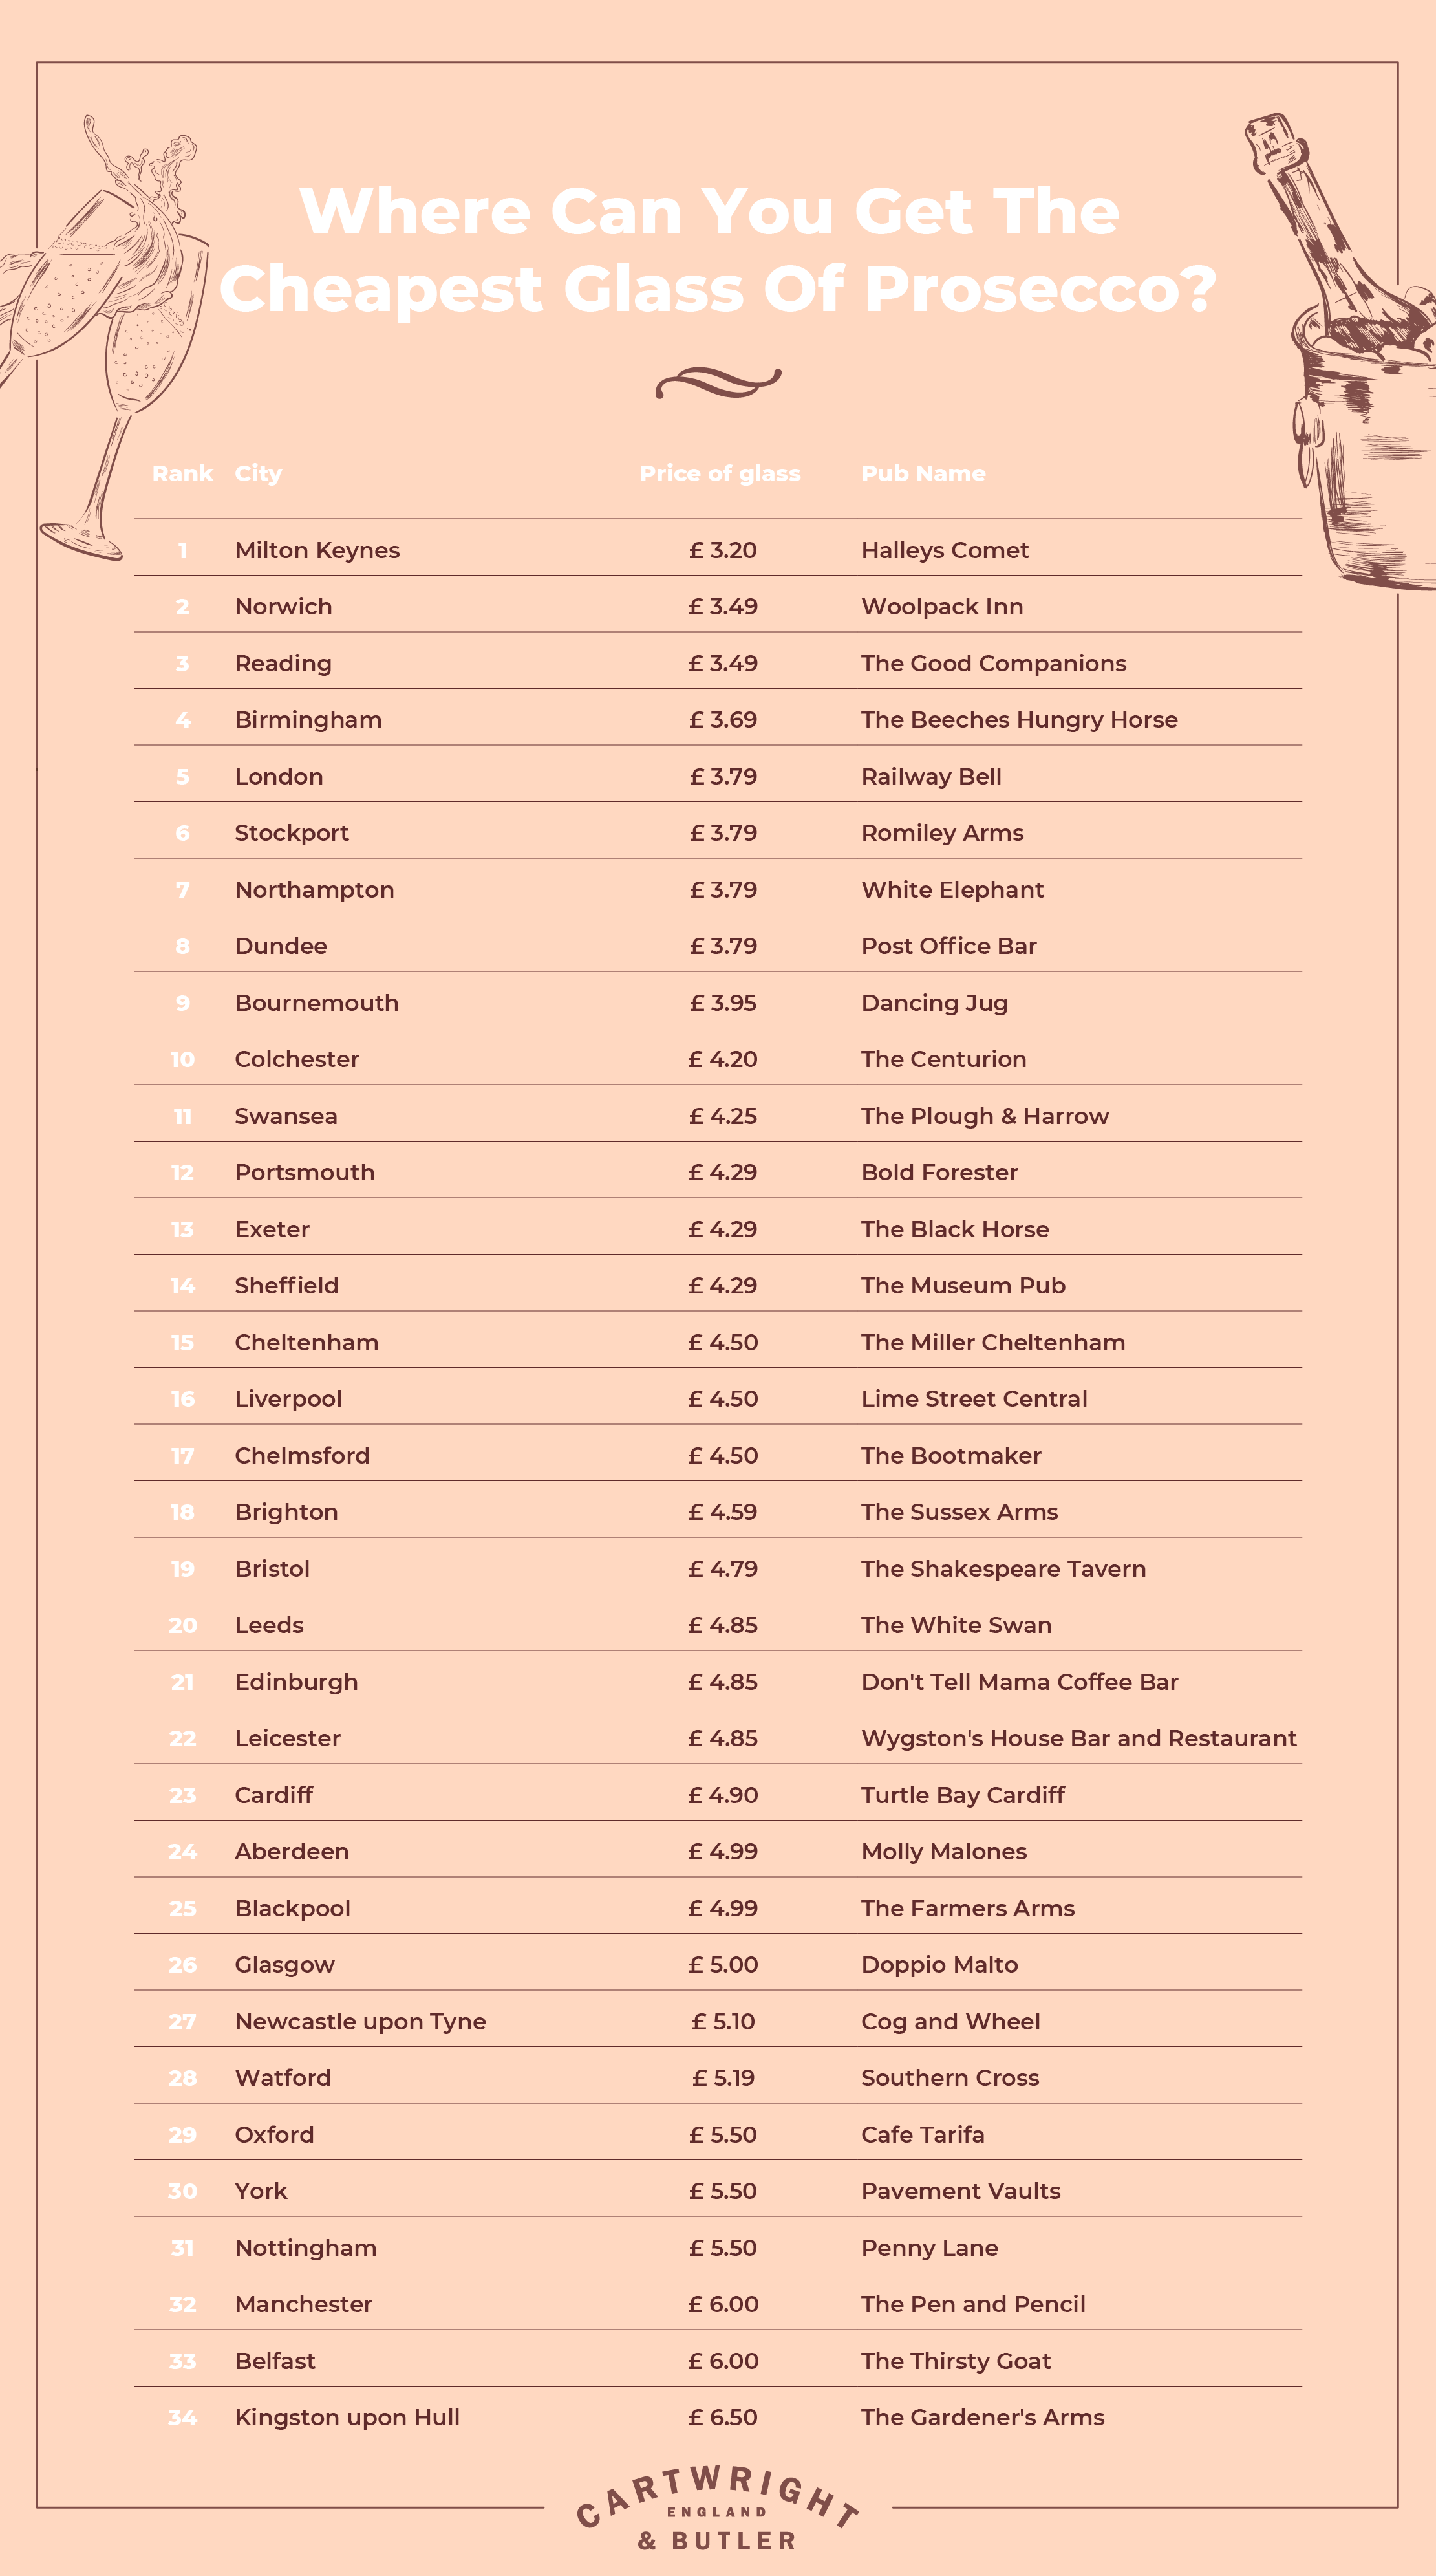 Table showing the cheapest glass of prosecco by location